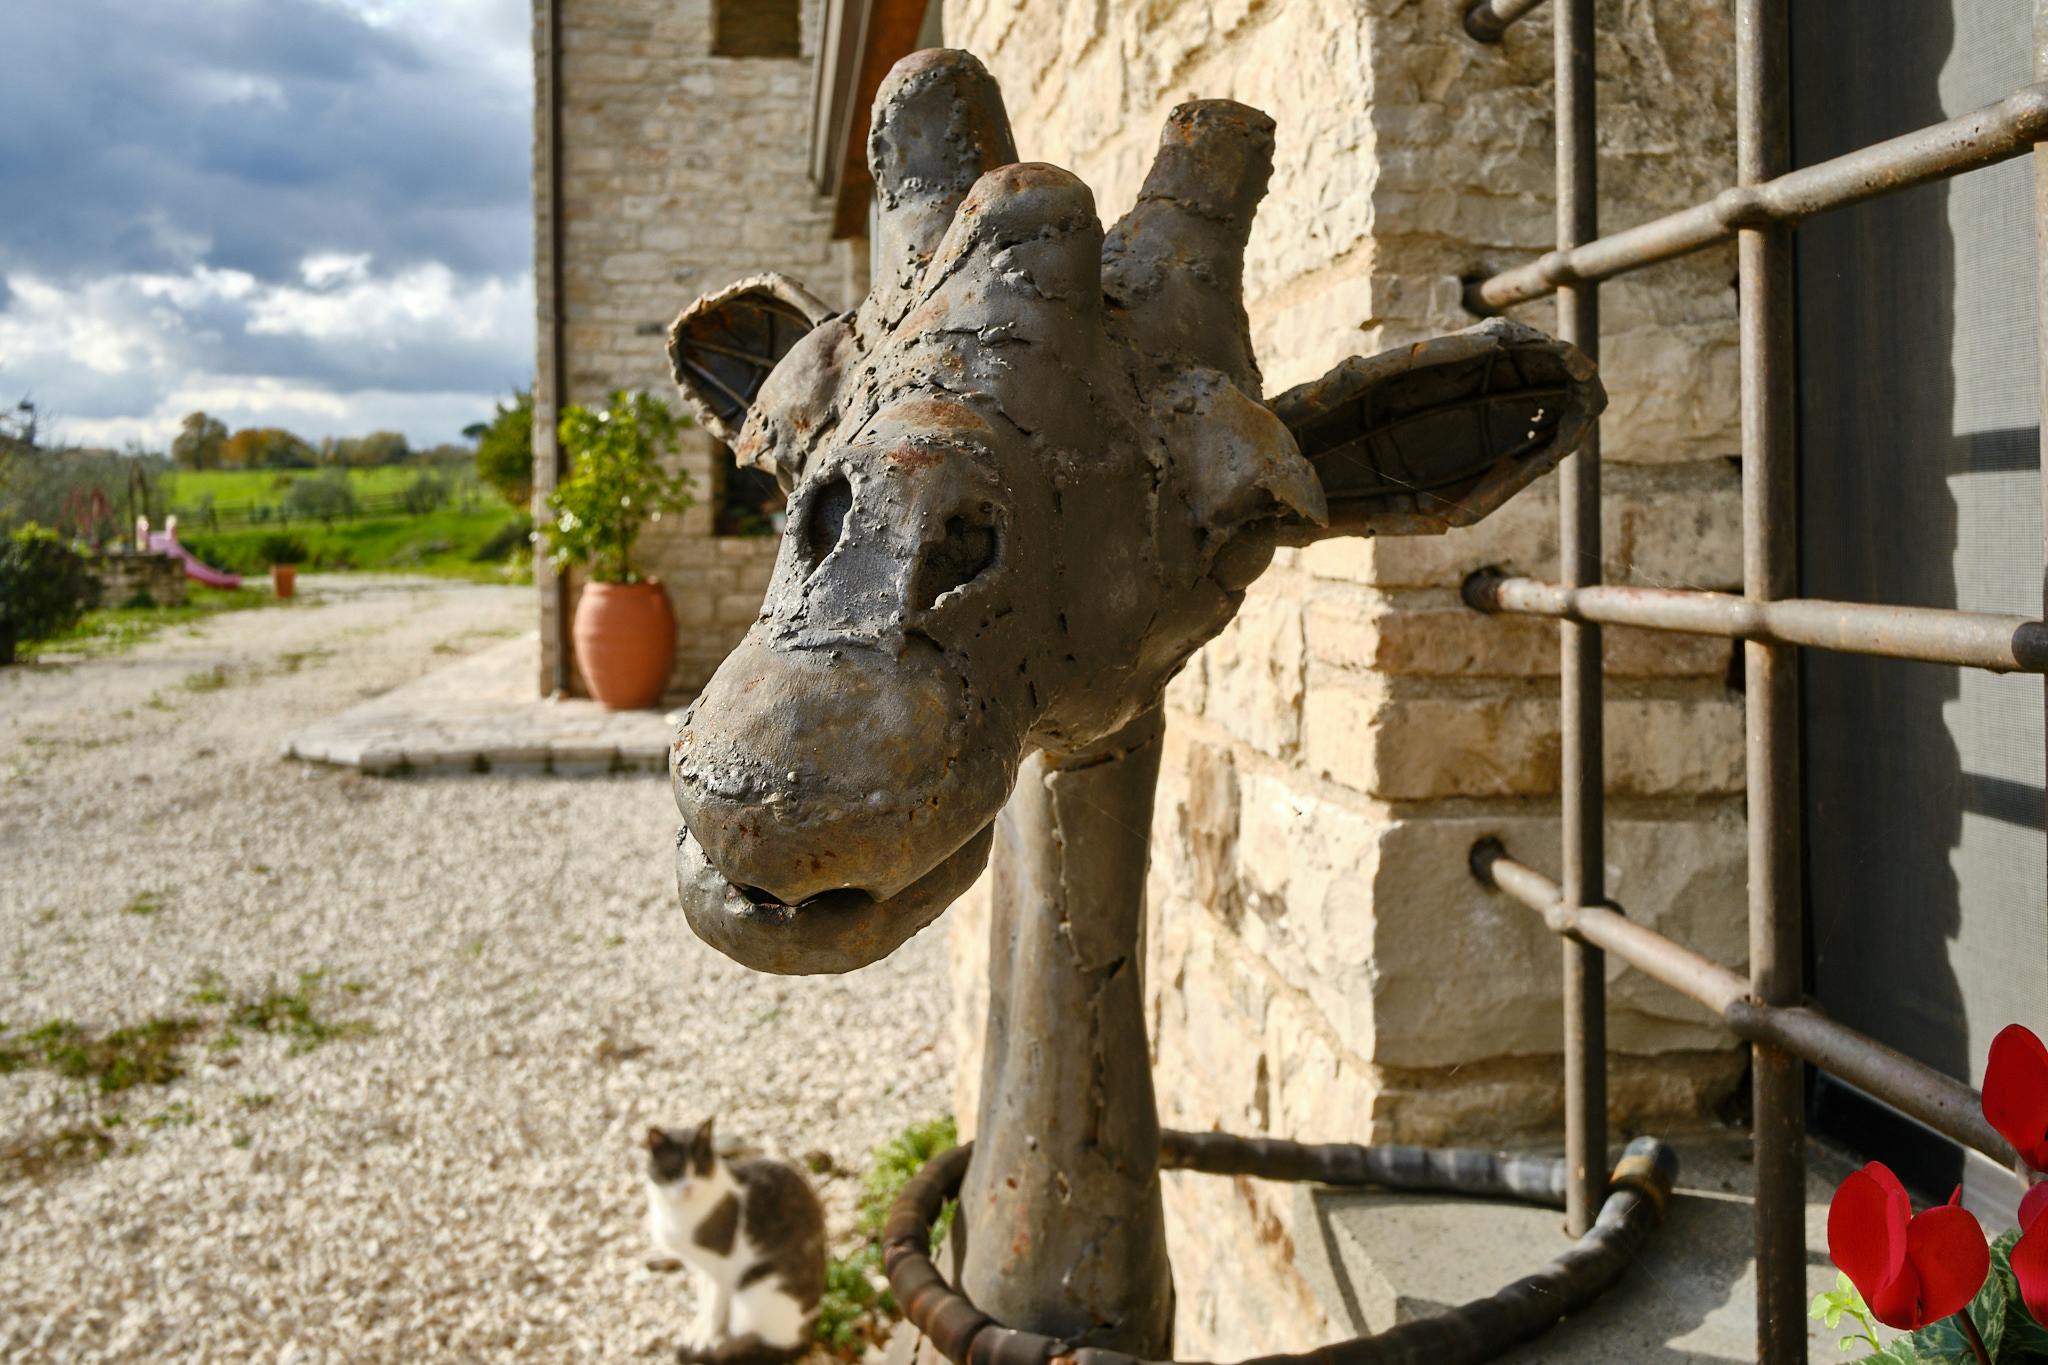 This iron giraffe from Kenya is located outside the country chalet of Tenuta le Pietre.